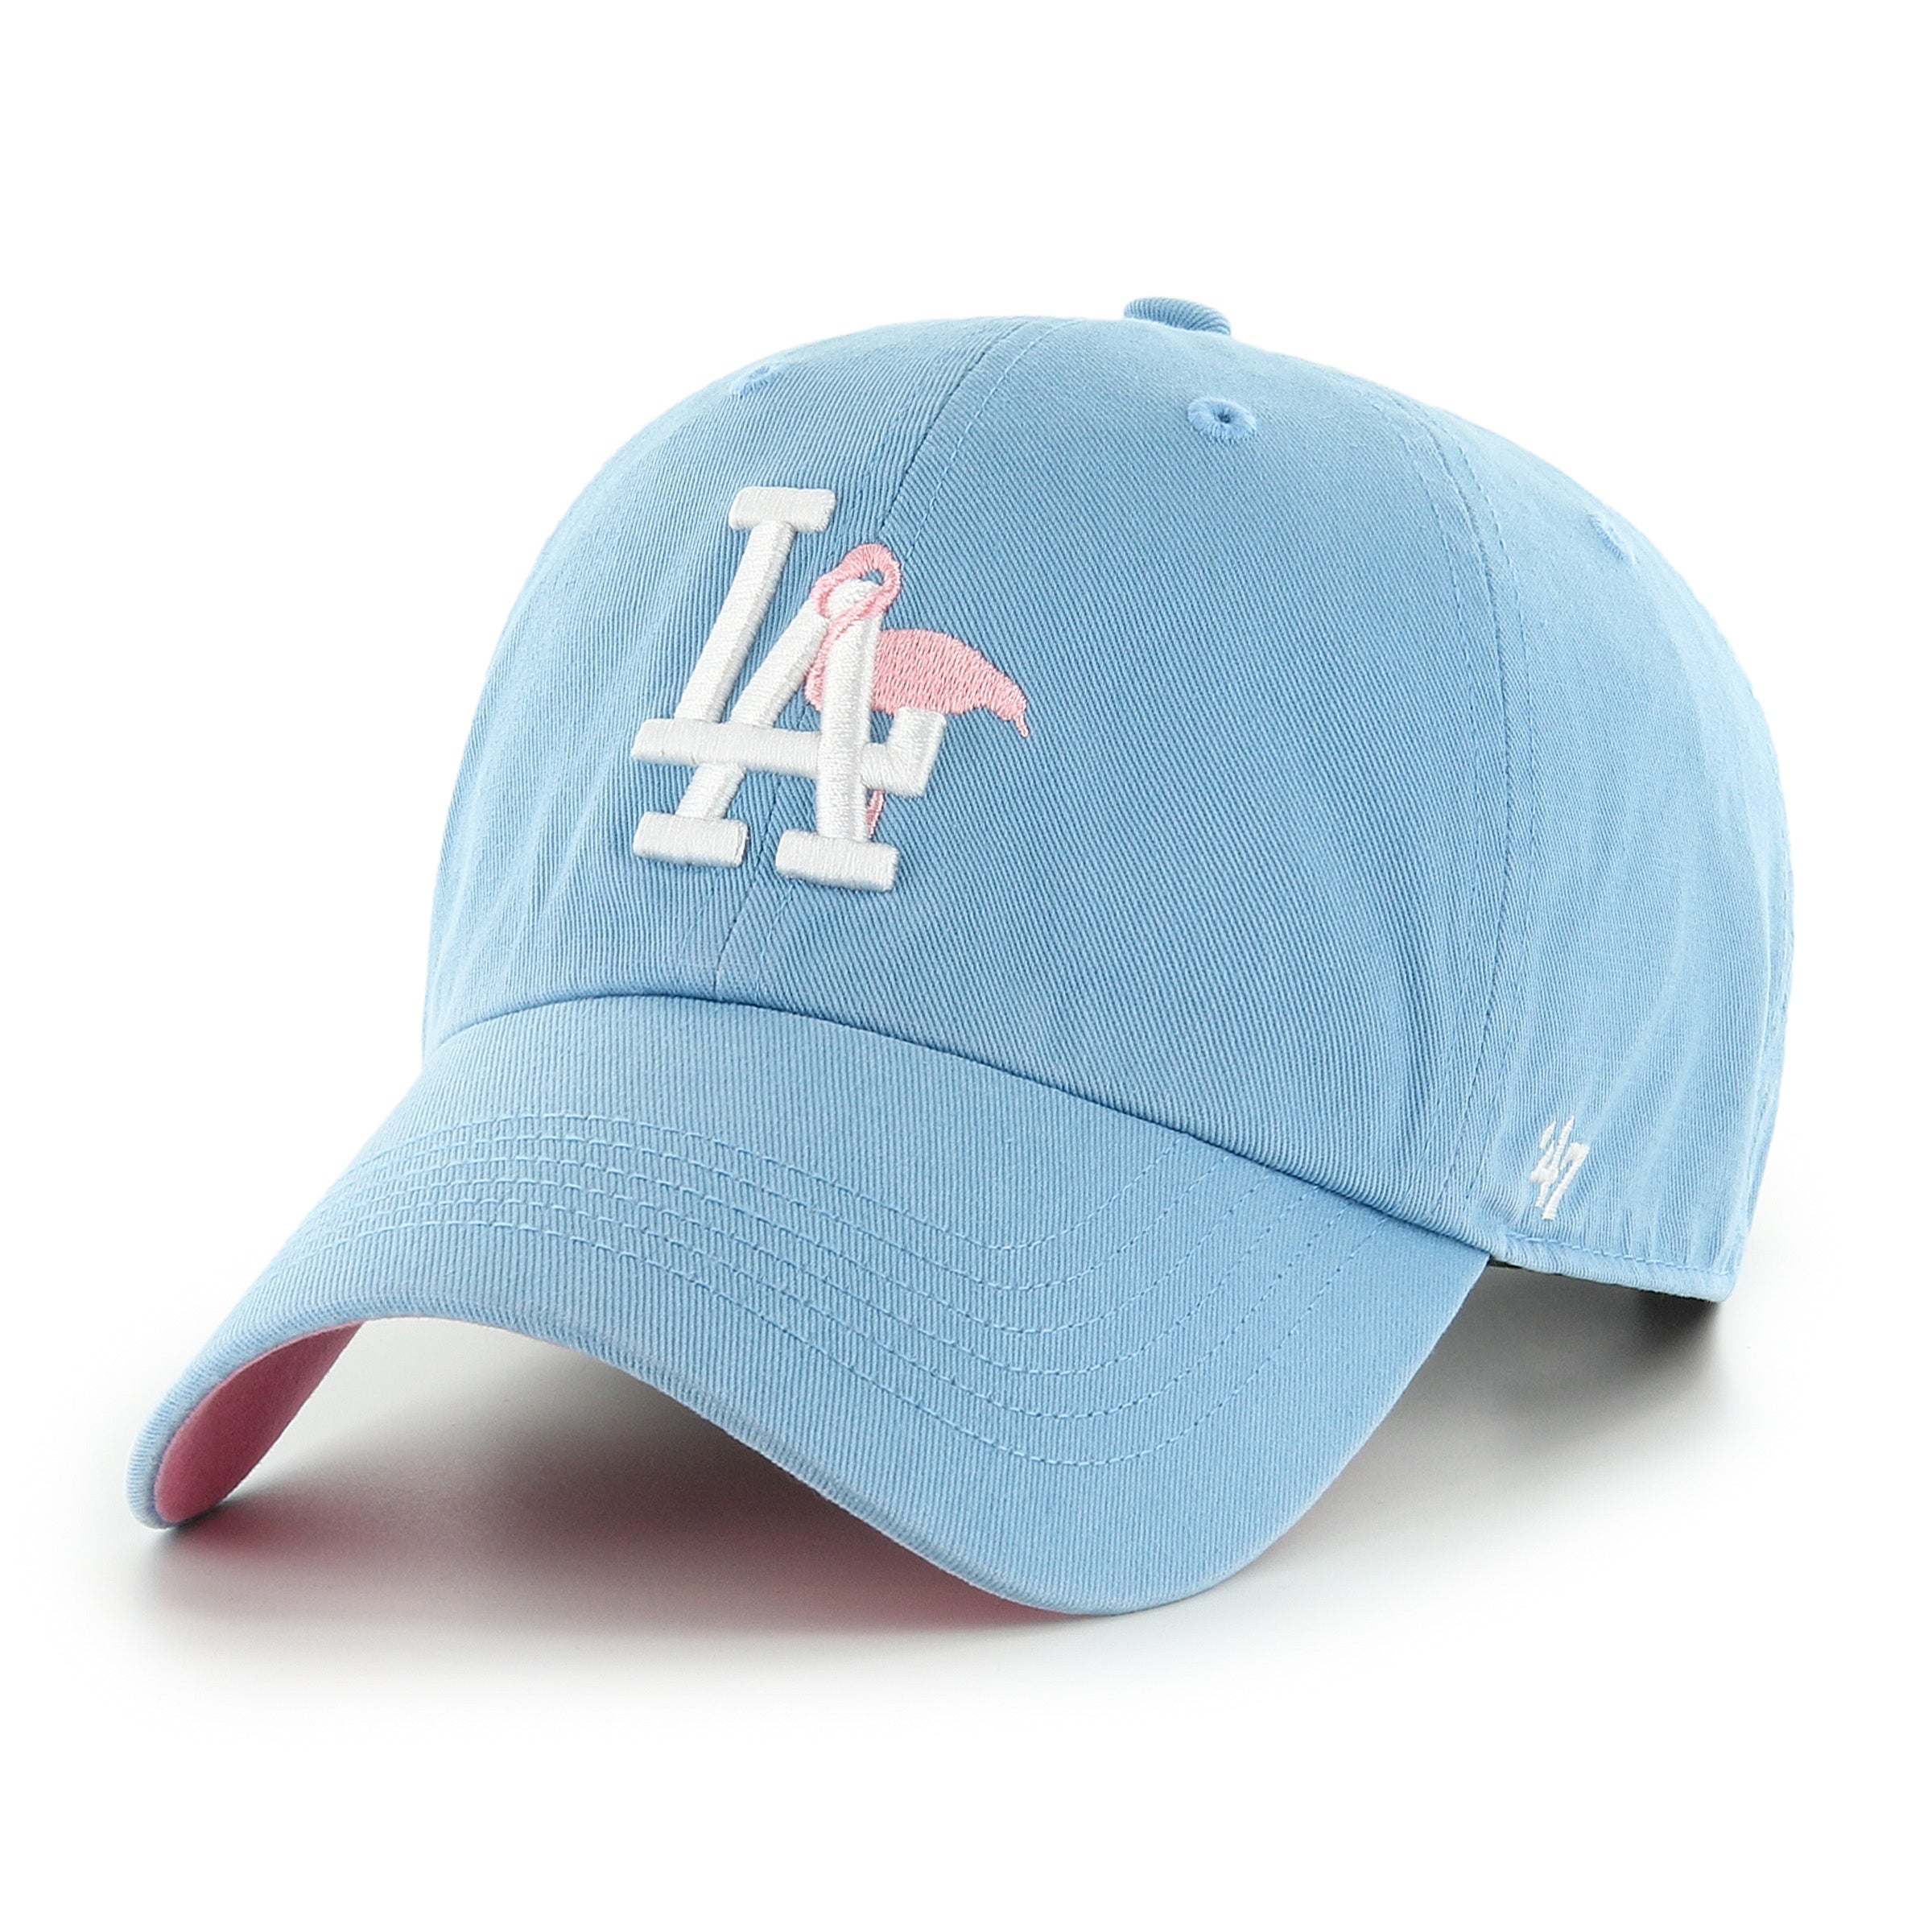 MLB LOS ANGELES DODGERS ICON ALT ’47 CLEAN UP BLUE